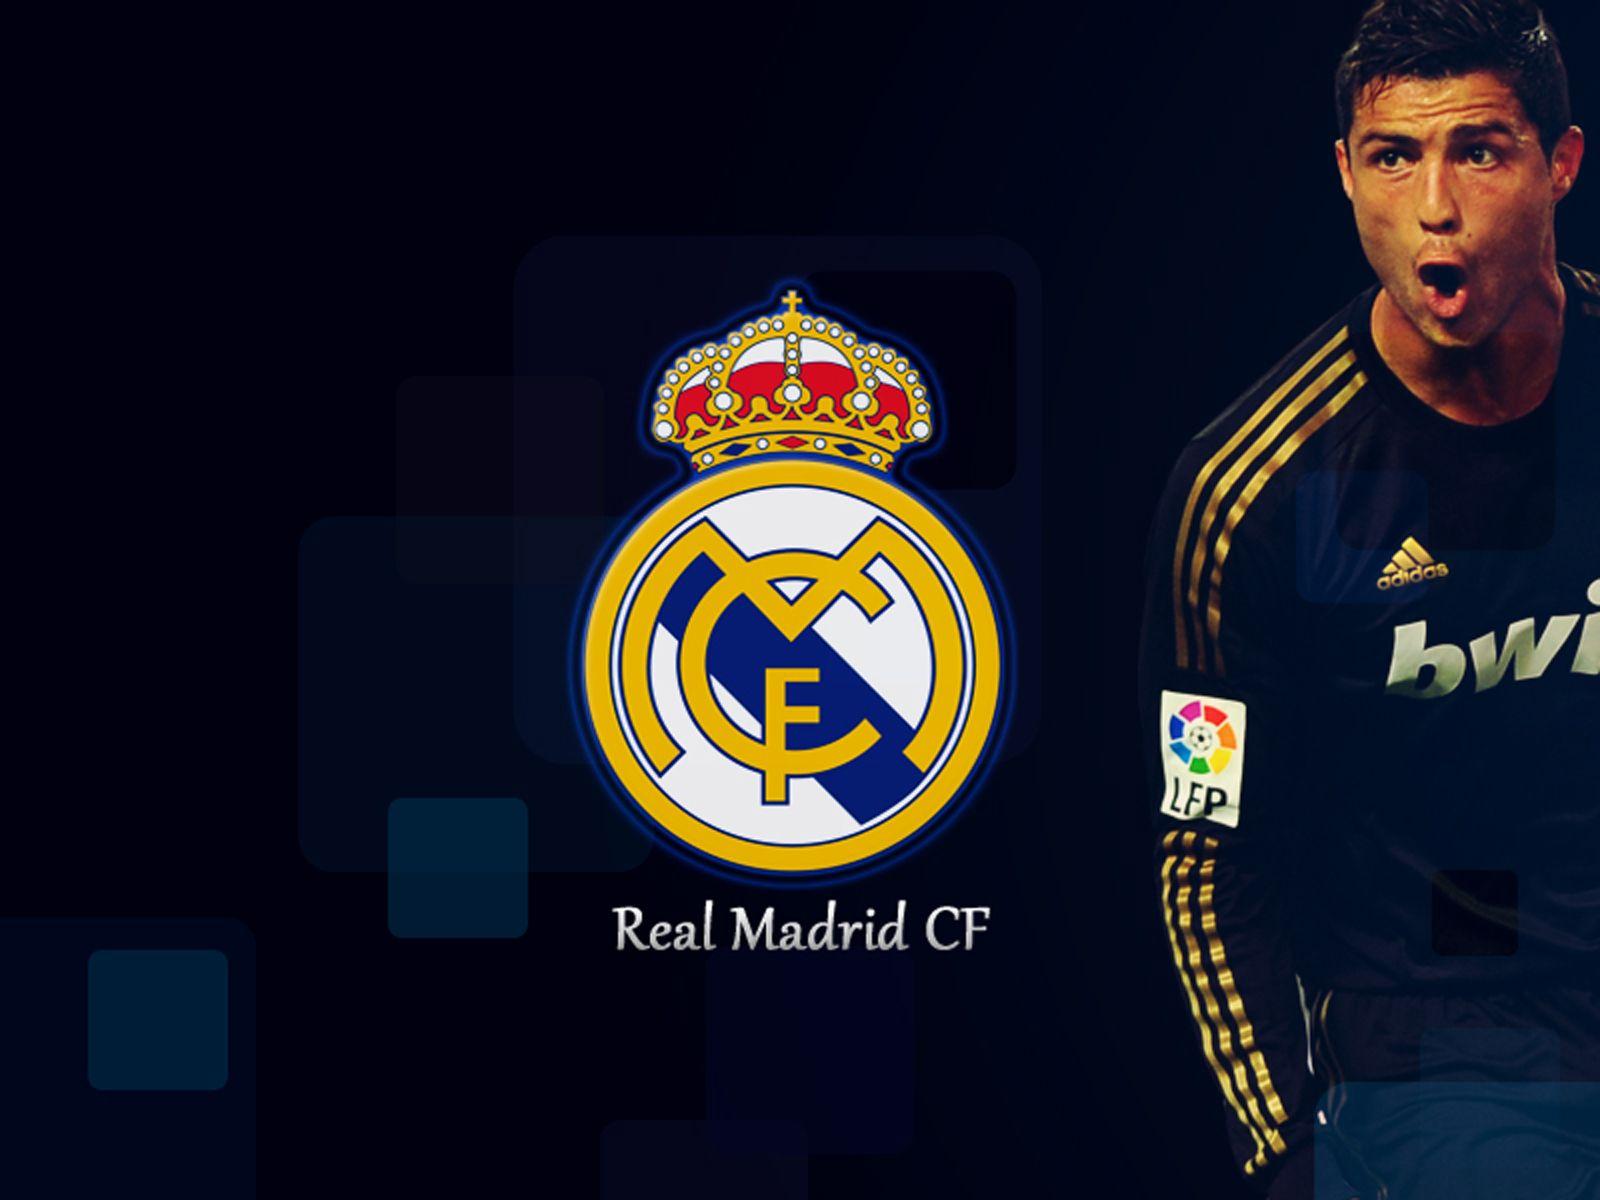 Real Madrid Cf Wallpaper. Android. Madrid and Real